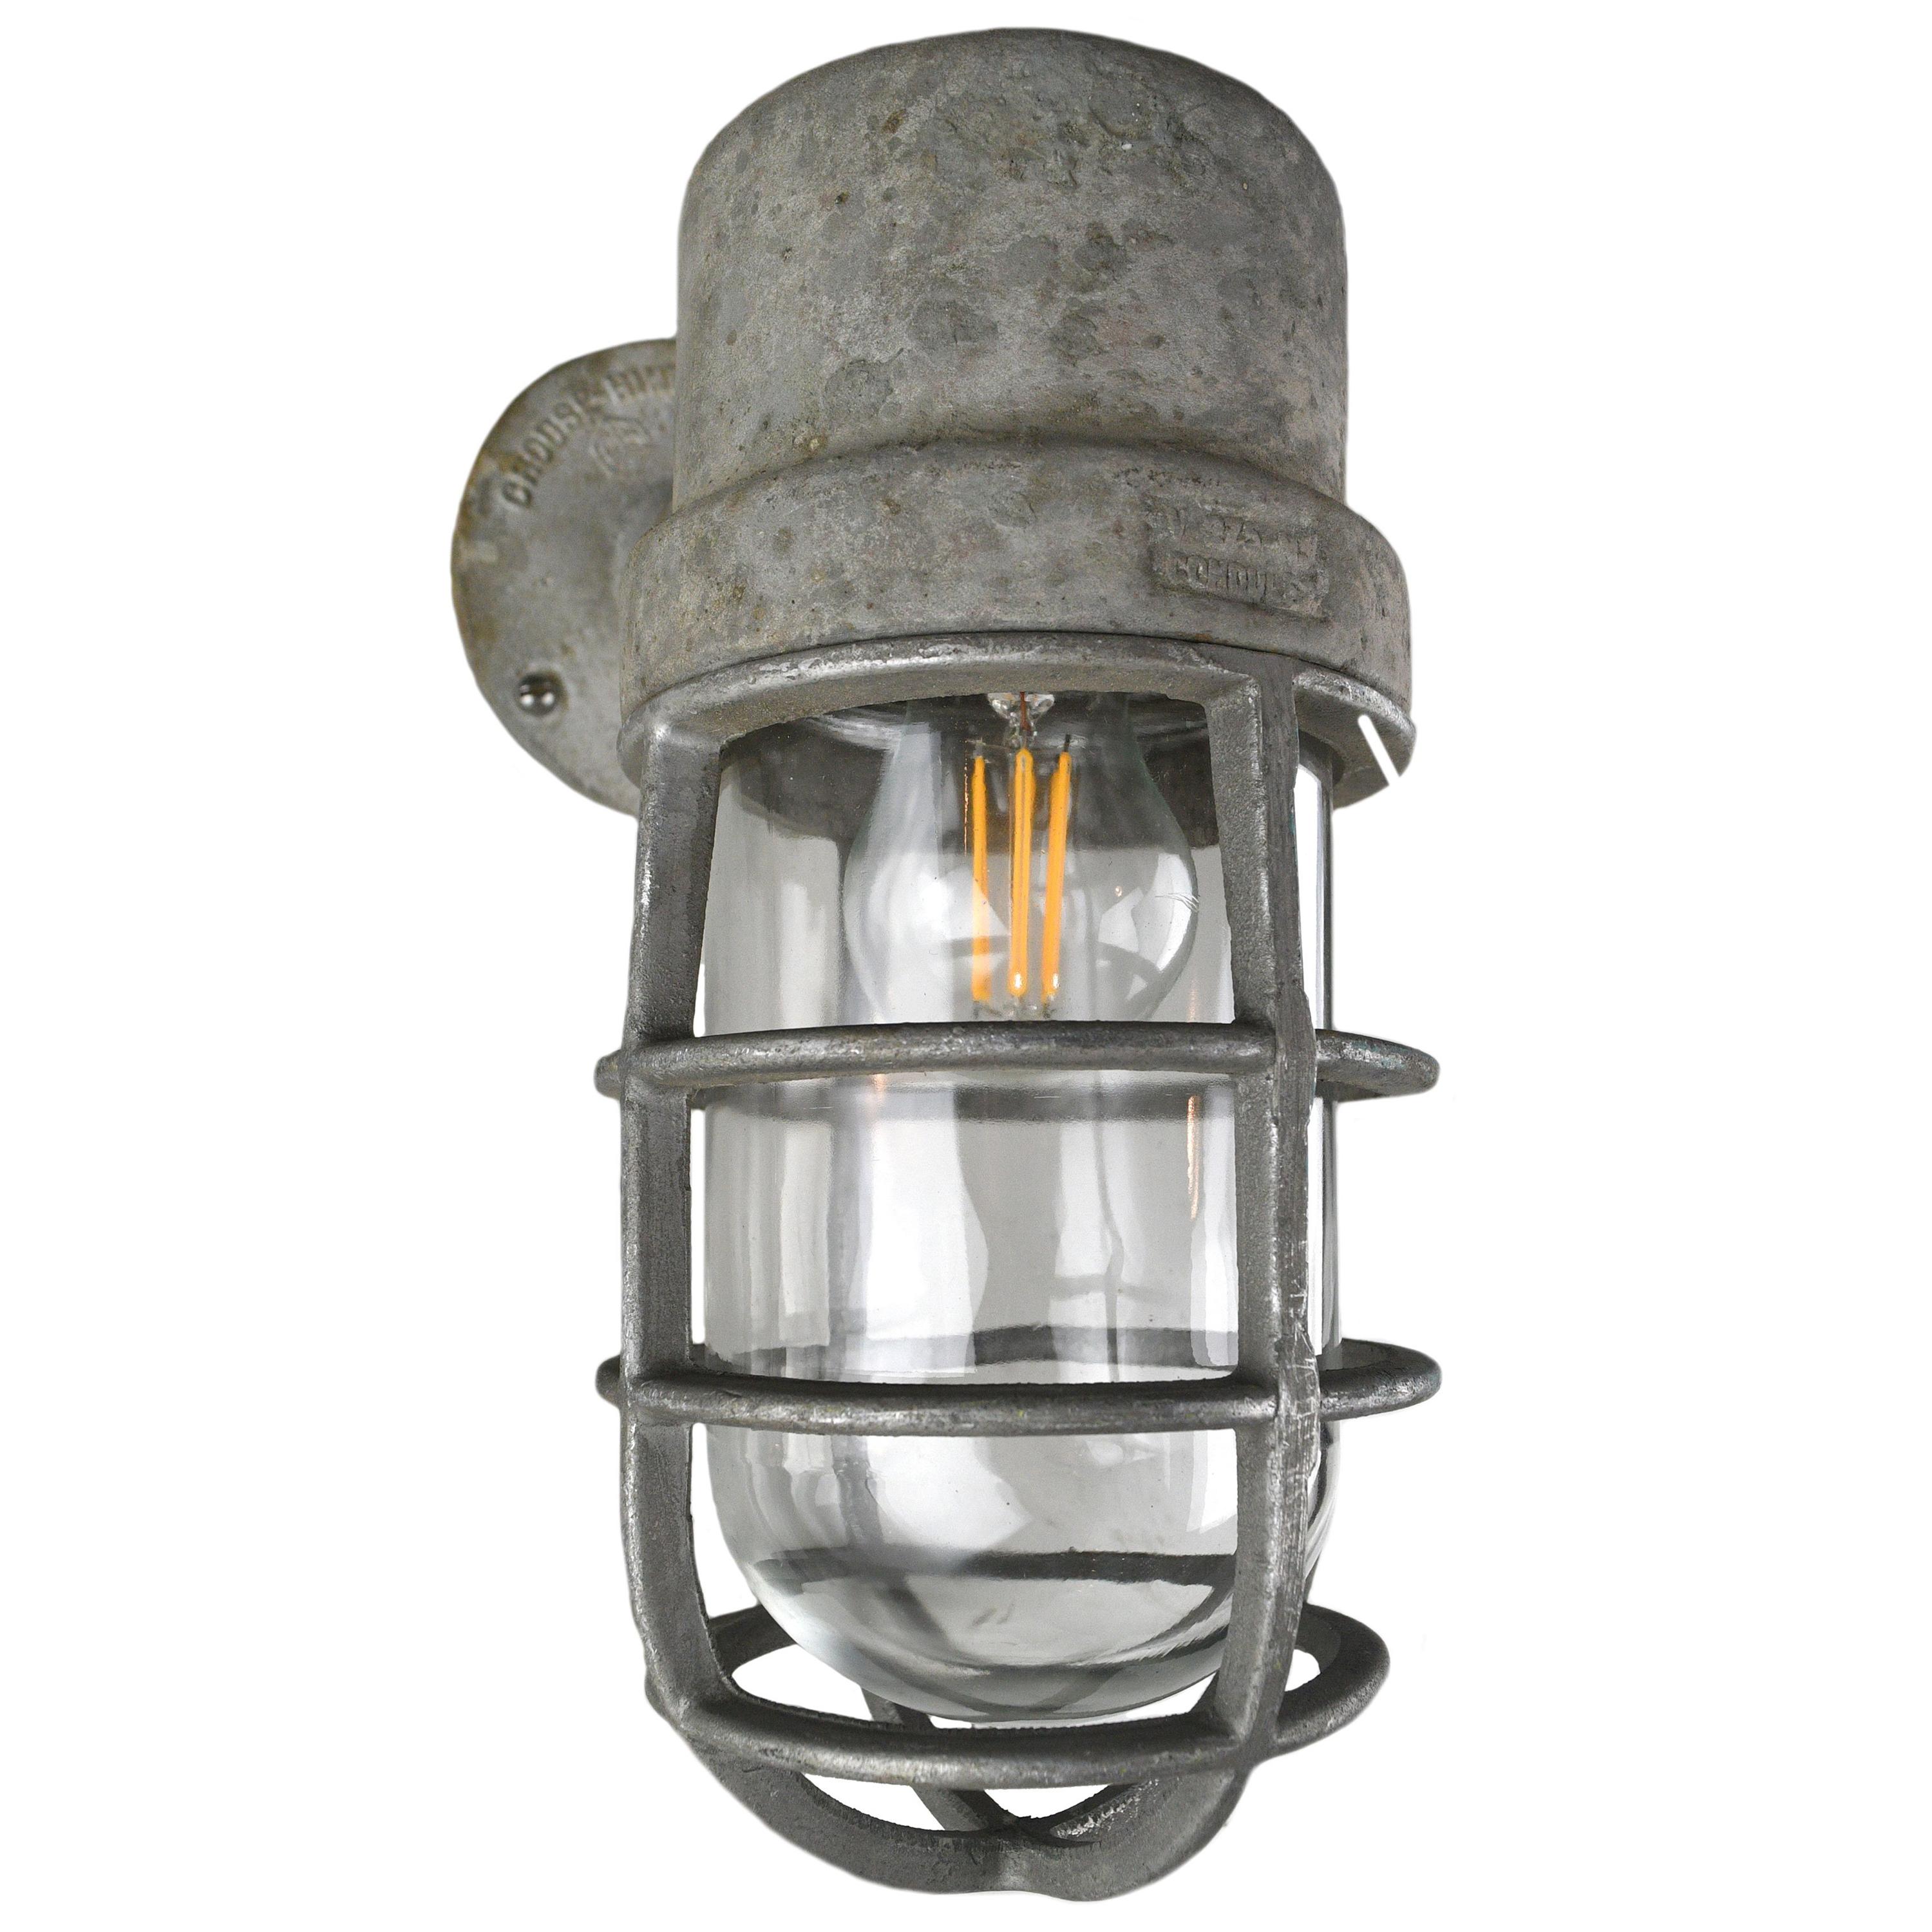 Crouse Hinds Industrial Sconce with Cage